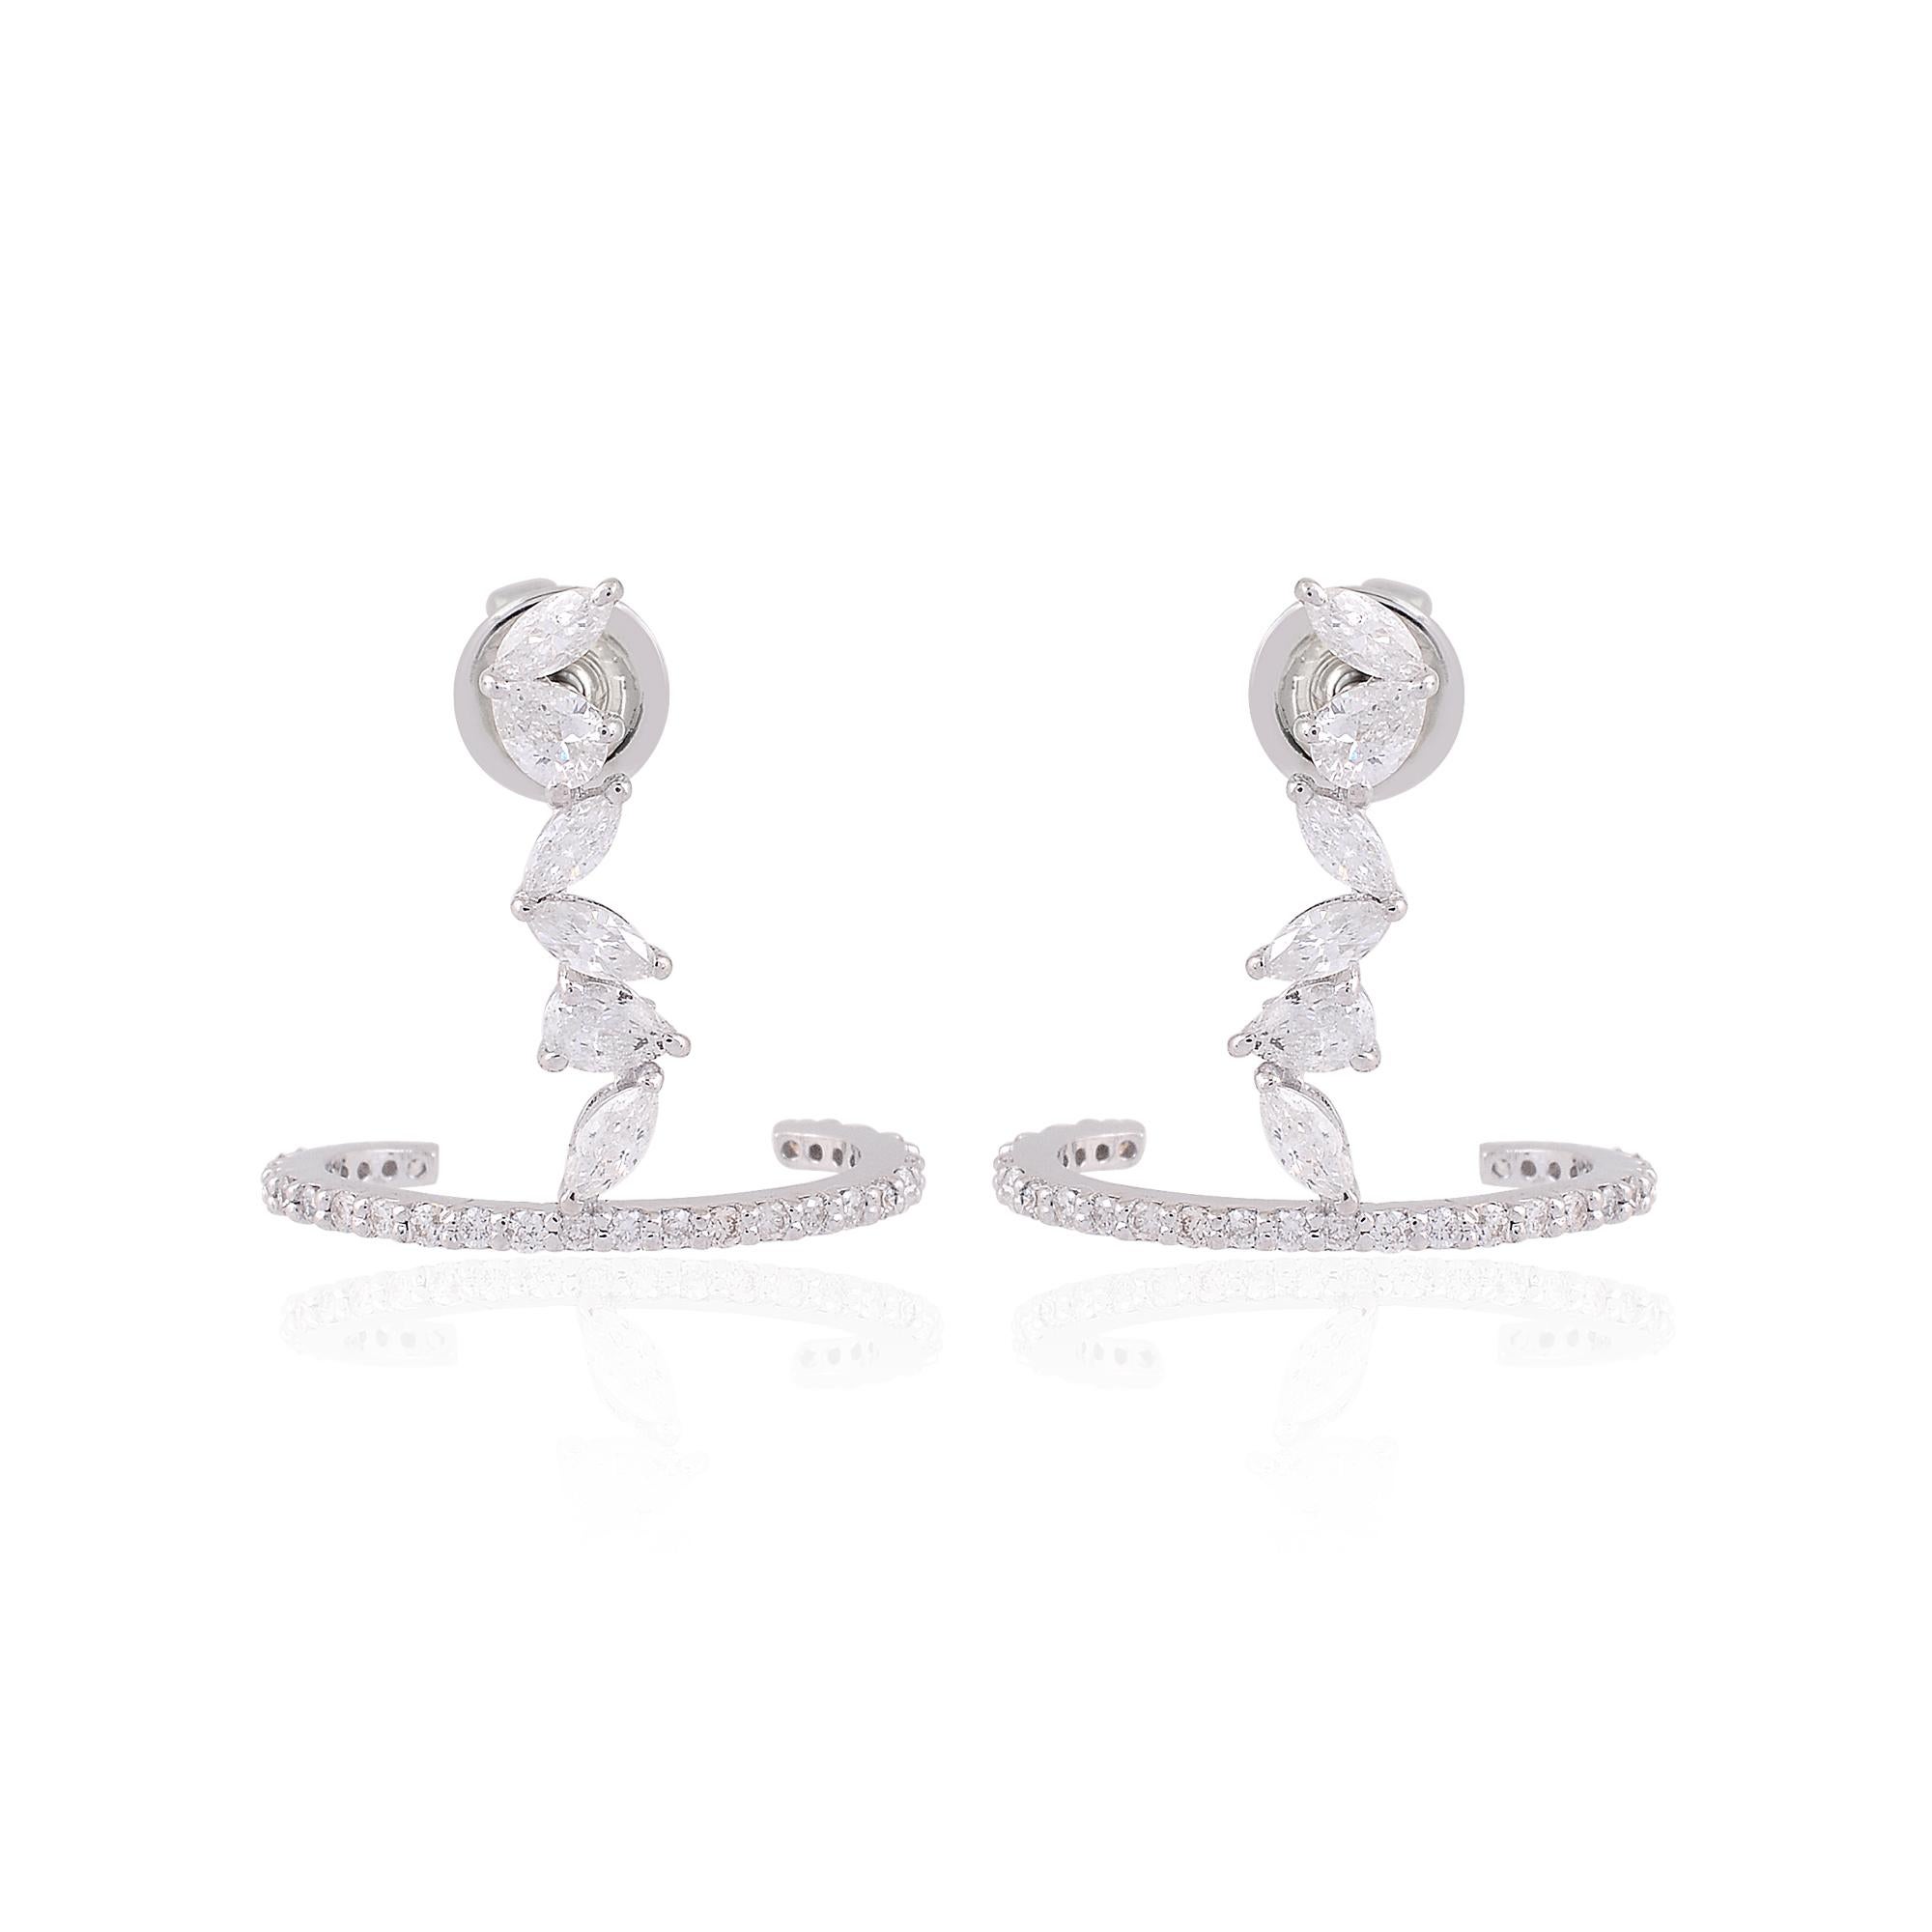 Item Code :- SEE-1127K
Gross Weight :- 2.38 gm
14k White Gold Weight :- 2.24 gm
Natural Diamond Weight :- 0.70 Carat  ( AVERAGE DIAMOND CLARITY SI1-SI2 & COLOR H-I )
Earrings Size :- 13x16 mm approx.

✦ Sizing
.....................
We can adjust